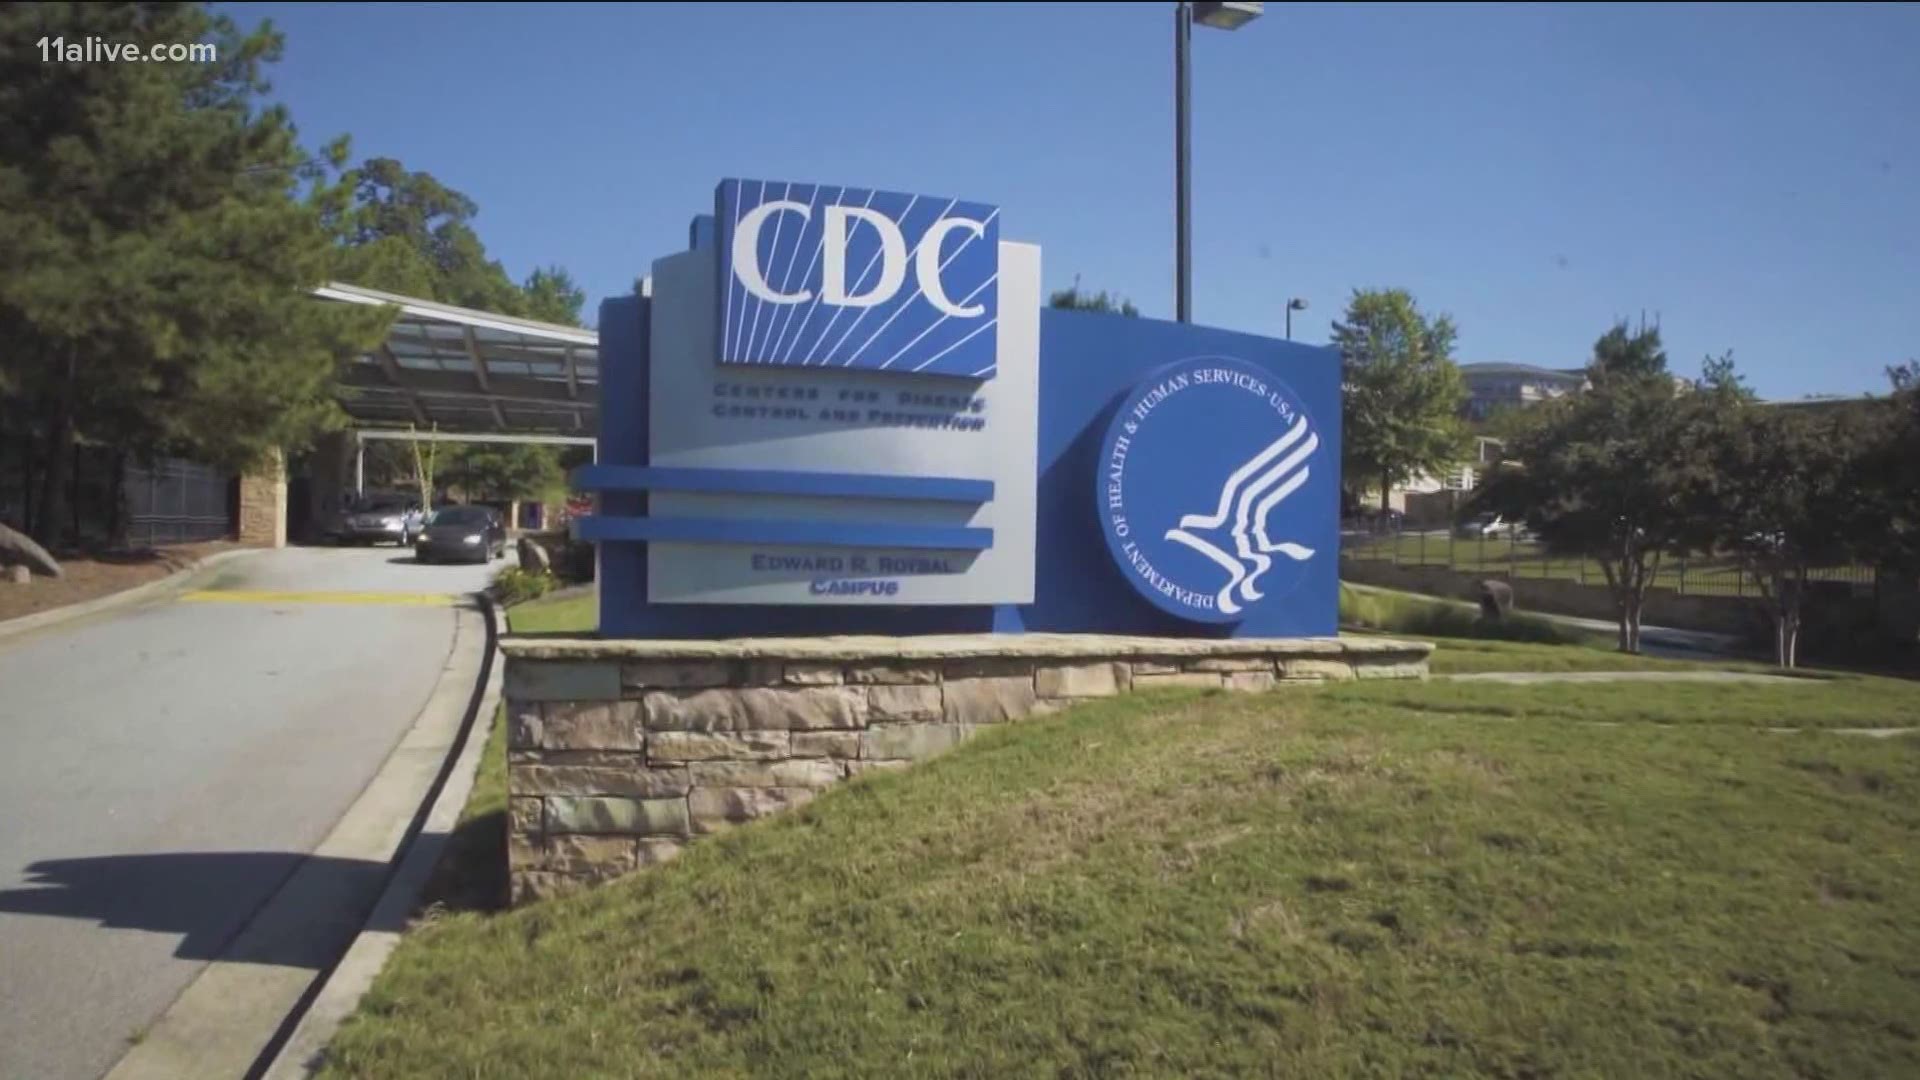 11Alive's Maura Sirianni reports on the new CDC guidance.